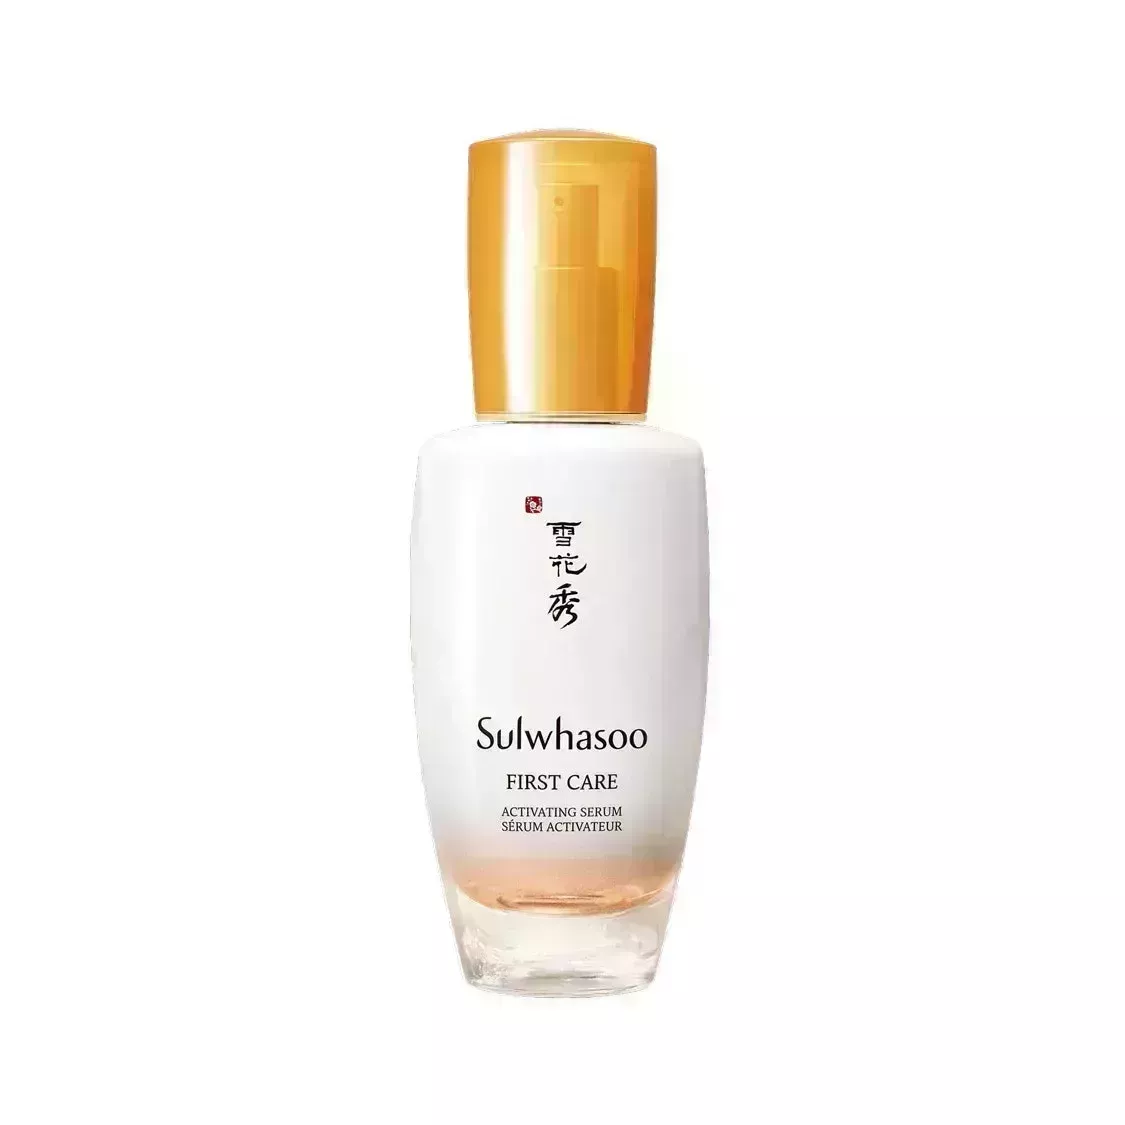 Sulwhasoo First Care Activating Serum white vial with orange cap on white background